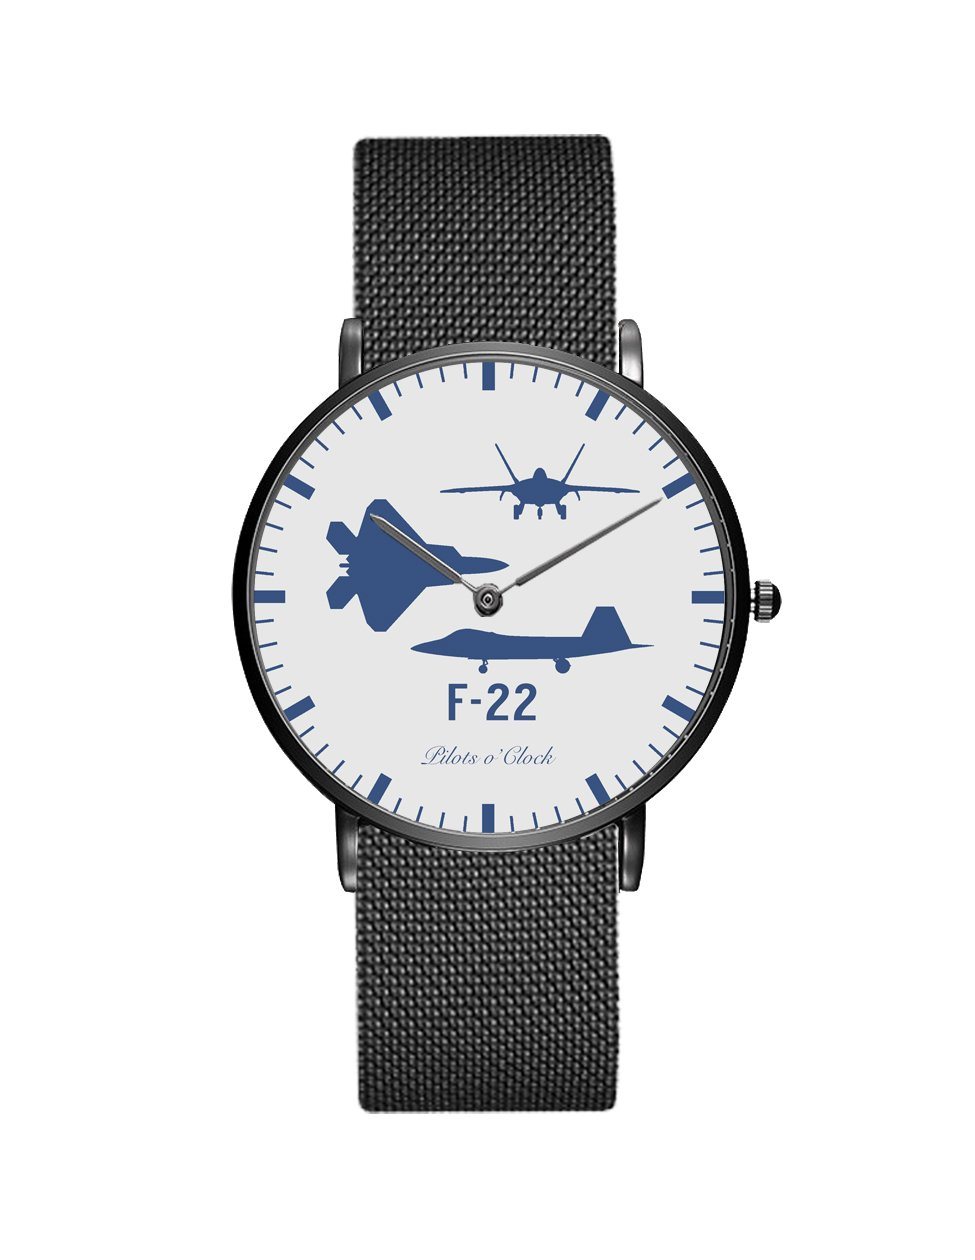 F22 Raptor (Special) Stainless Steel Strap Watches Pilot Eyes Store Black & Stainless Steel Strap 